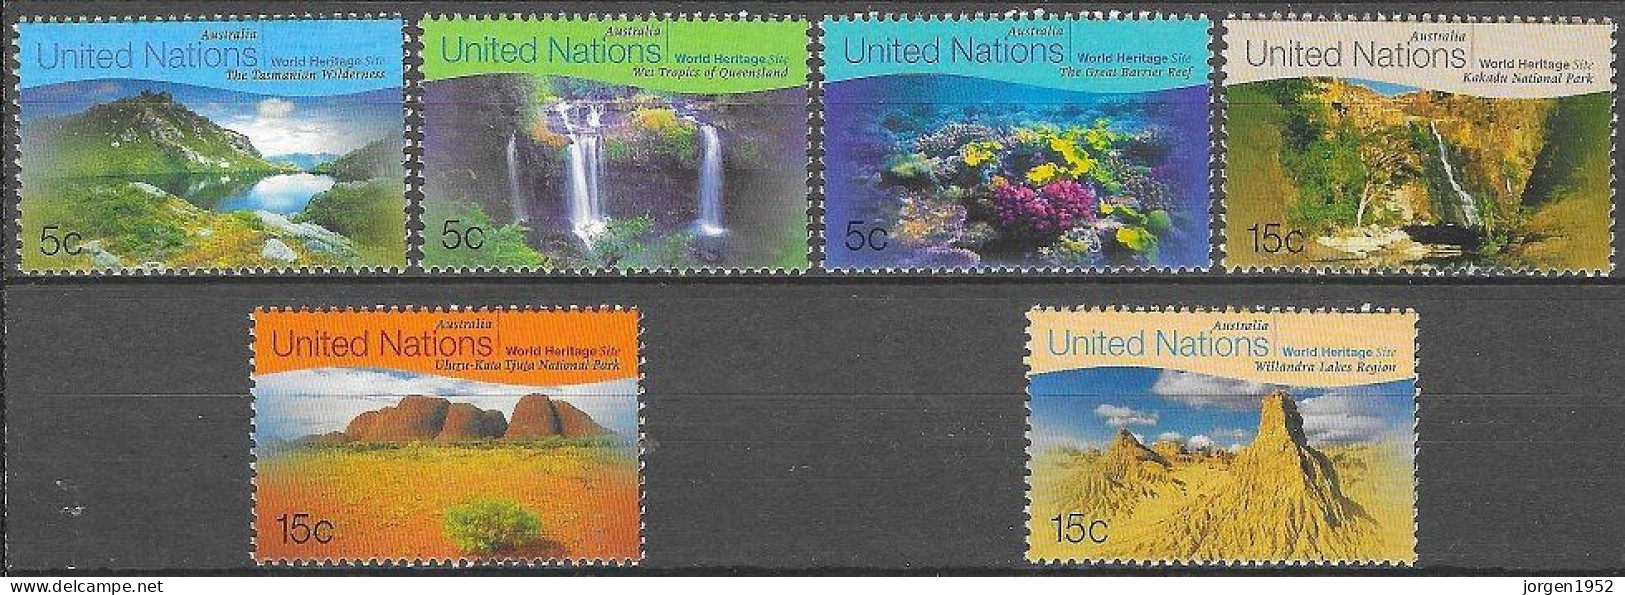 UNITED NATIONS # NEW YORK FROM 1999 STAMPWORLD 809-14** - Neufs